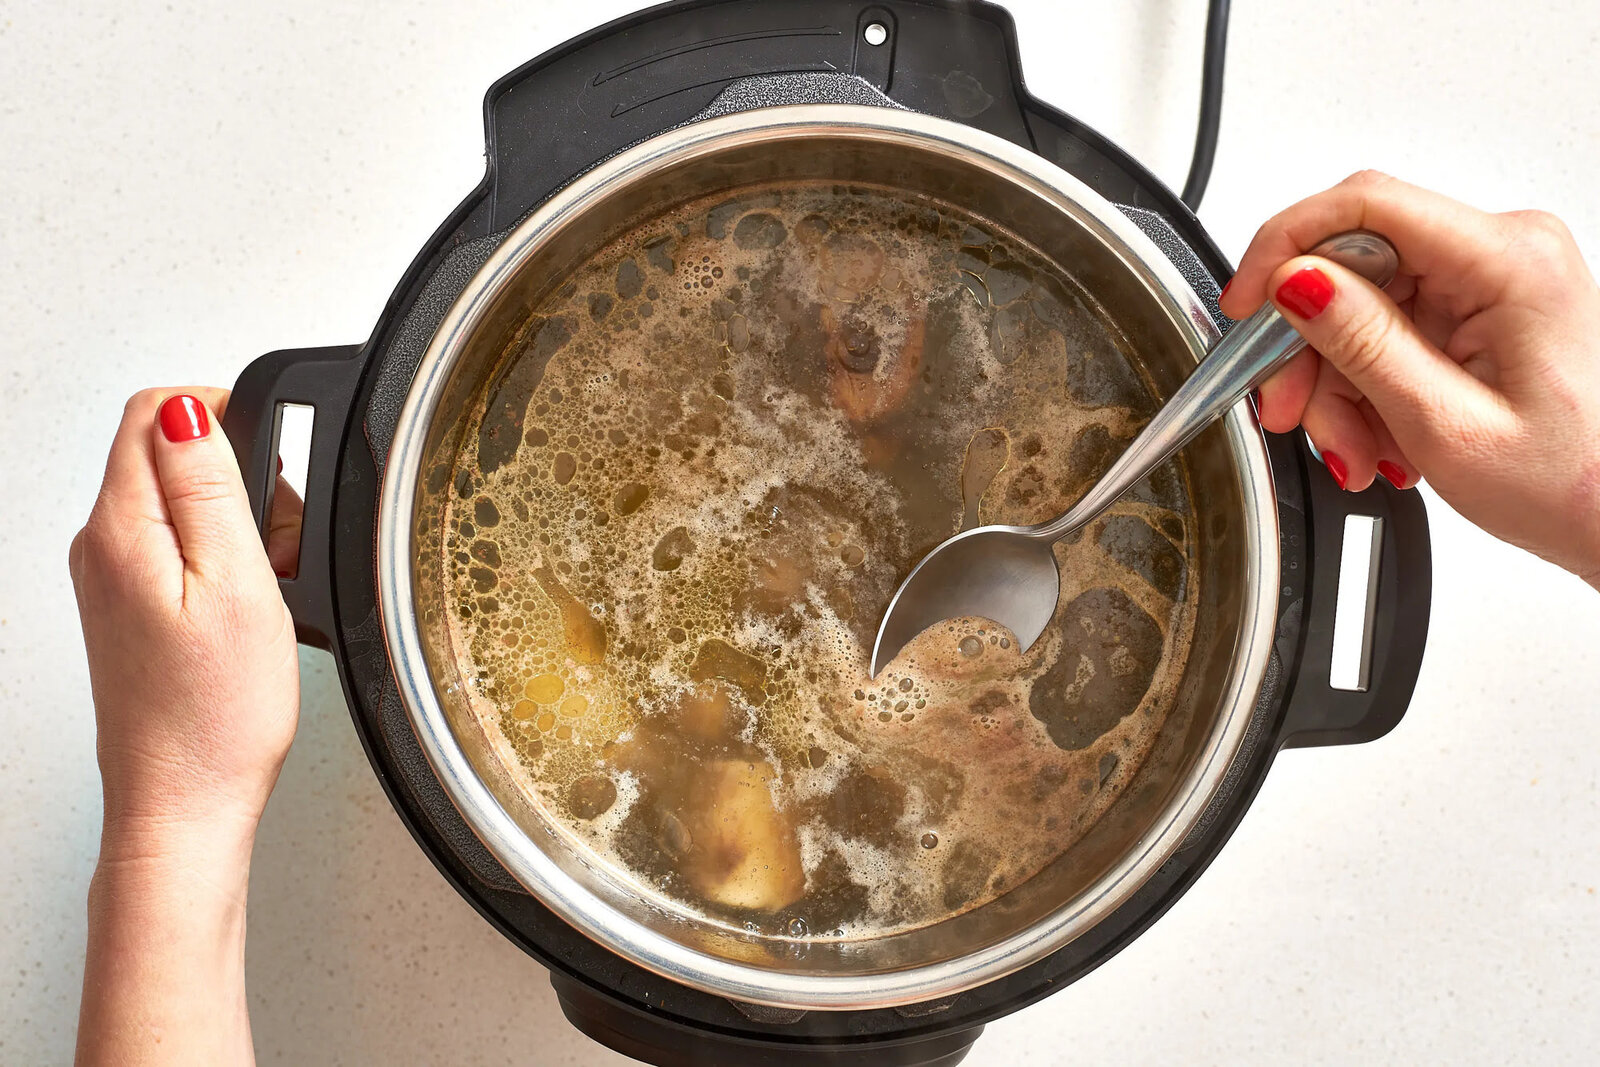 How To Make Broth From Soup Bones In An Electric Pressure Cooker